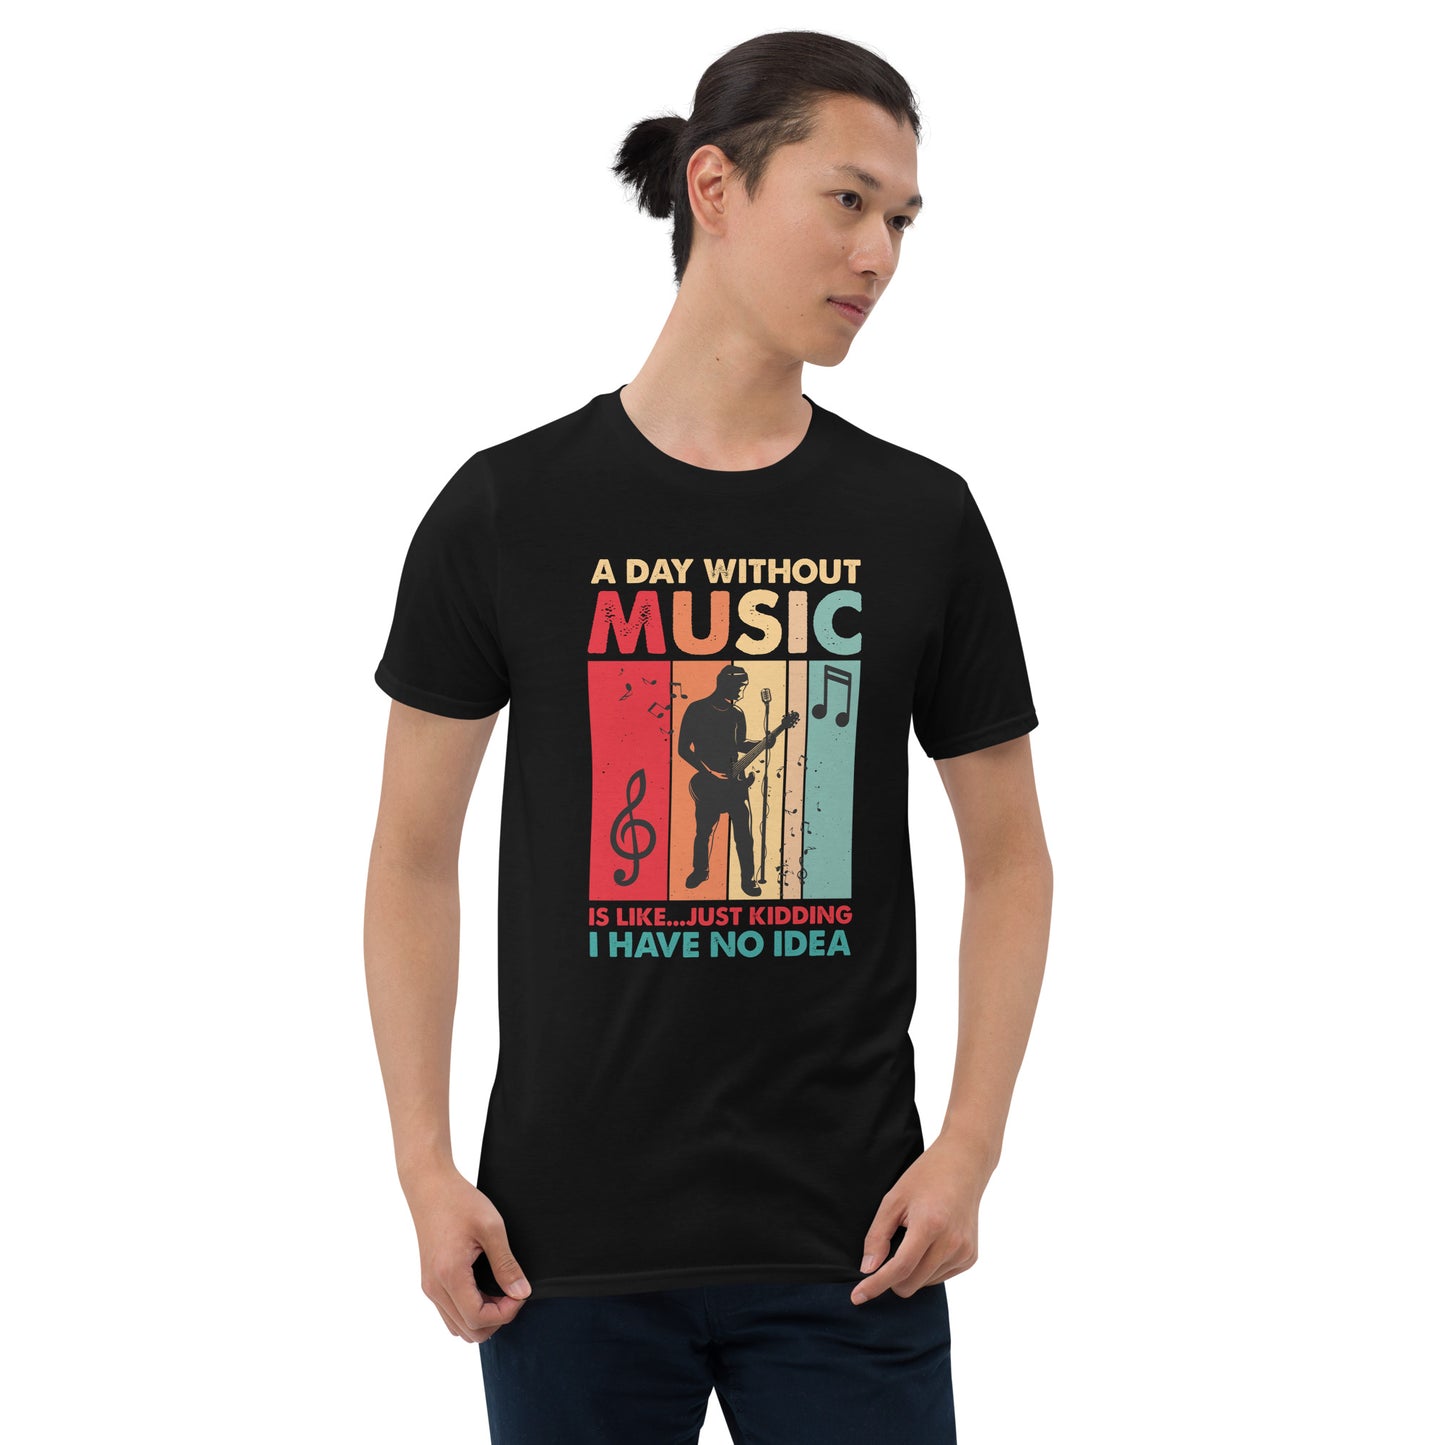 A Day Without Music Is Like... Just Kidding I Have No Idea Shirt